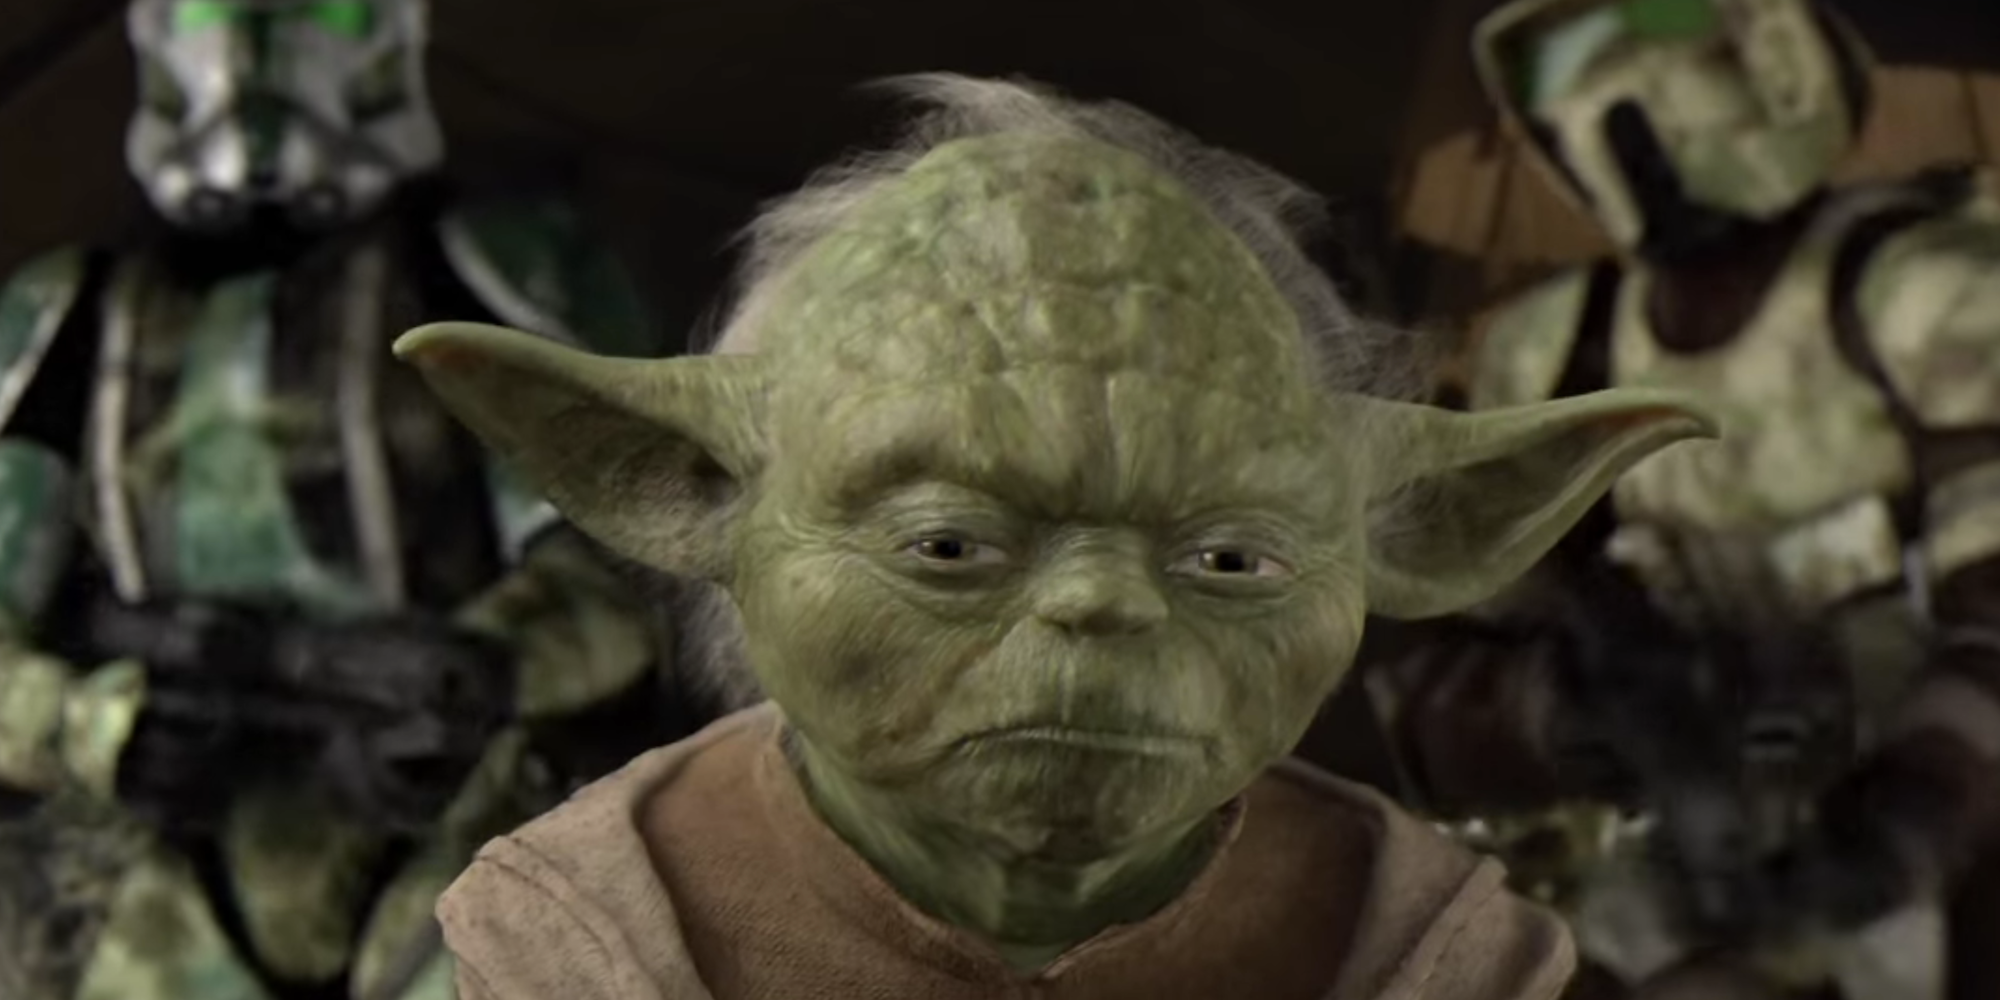 Yoda survives Order 66 in Star Wars Revenge of the Sith